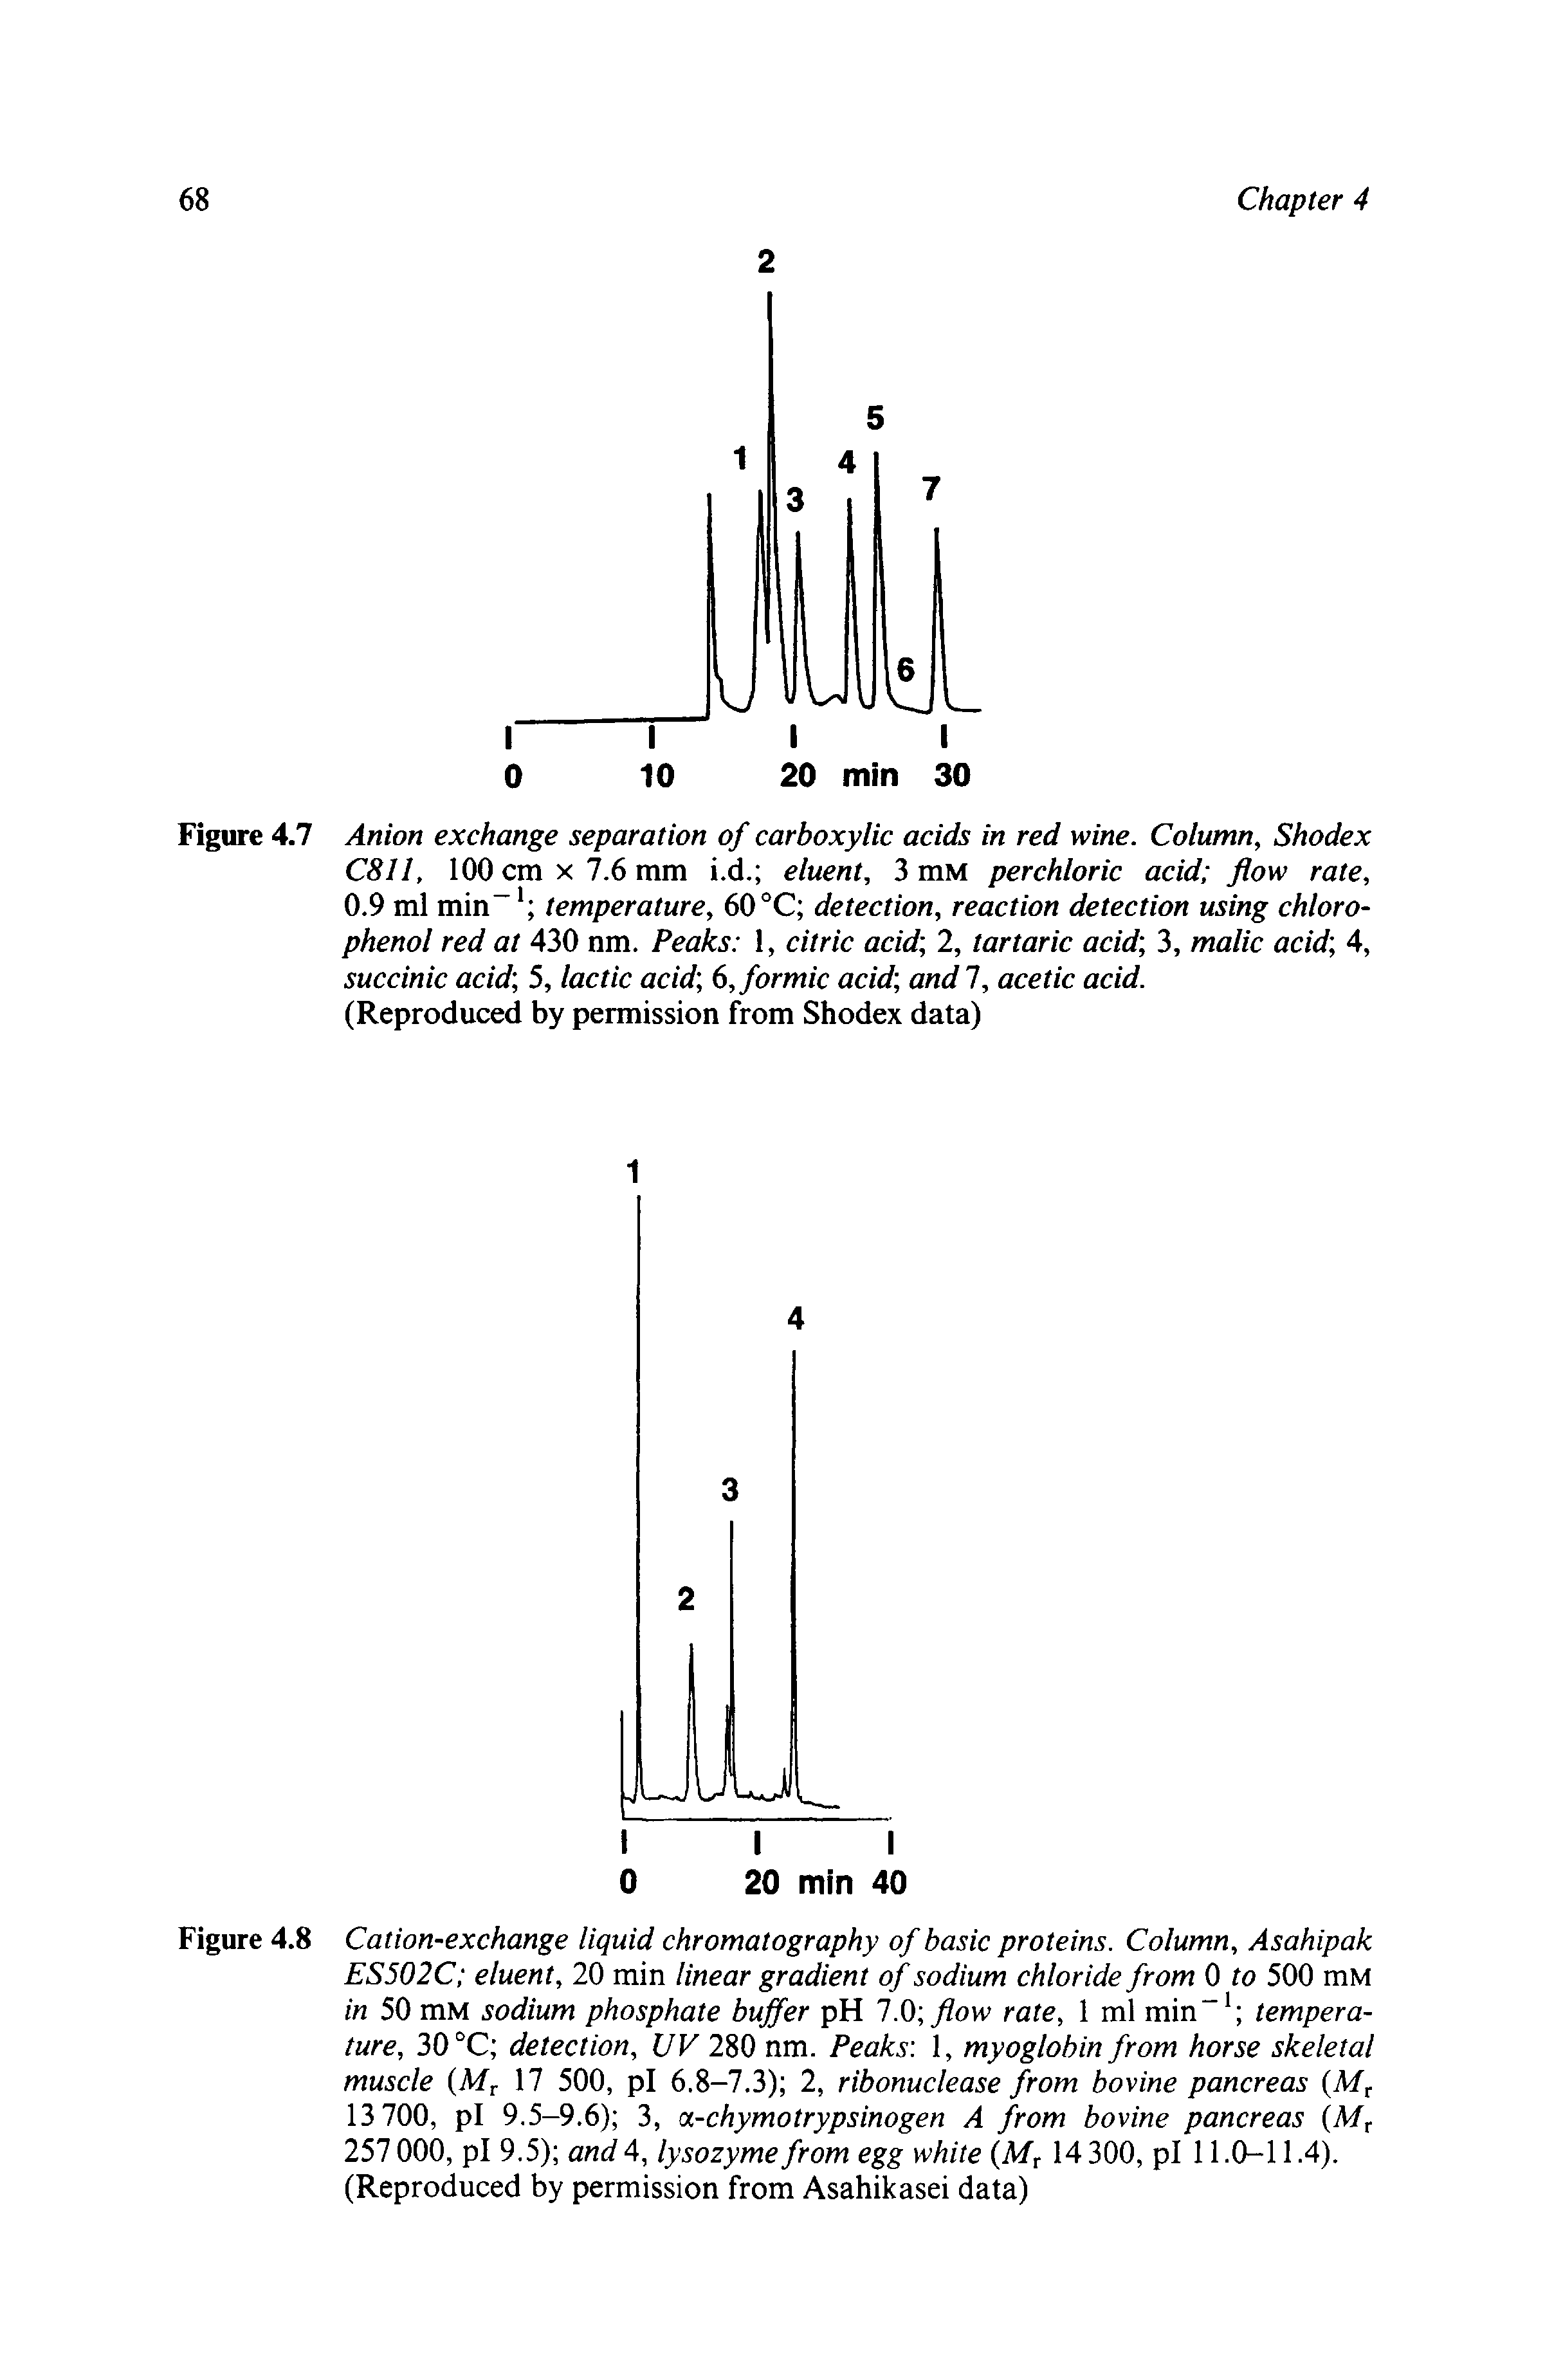 Figure 4.7 Anion exchange separation of carboxylic acids in red wine. Column, Shodex C811, 100 cm x 7.6 mm i.d. eluent, 3 mM perchloric acid flow rate, 0.9 ml min-1 temperature, 60 °C detection, reaction detection using chloro-phenol red at 430 nm. Peaks 1, citric acid 2, tartaric acid 3, malic acid 4, succinic acid 5, lactic acid 6, formic acid and 1, acetic acid.